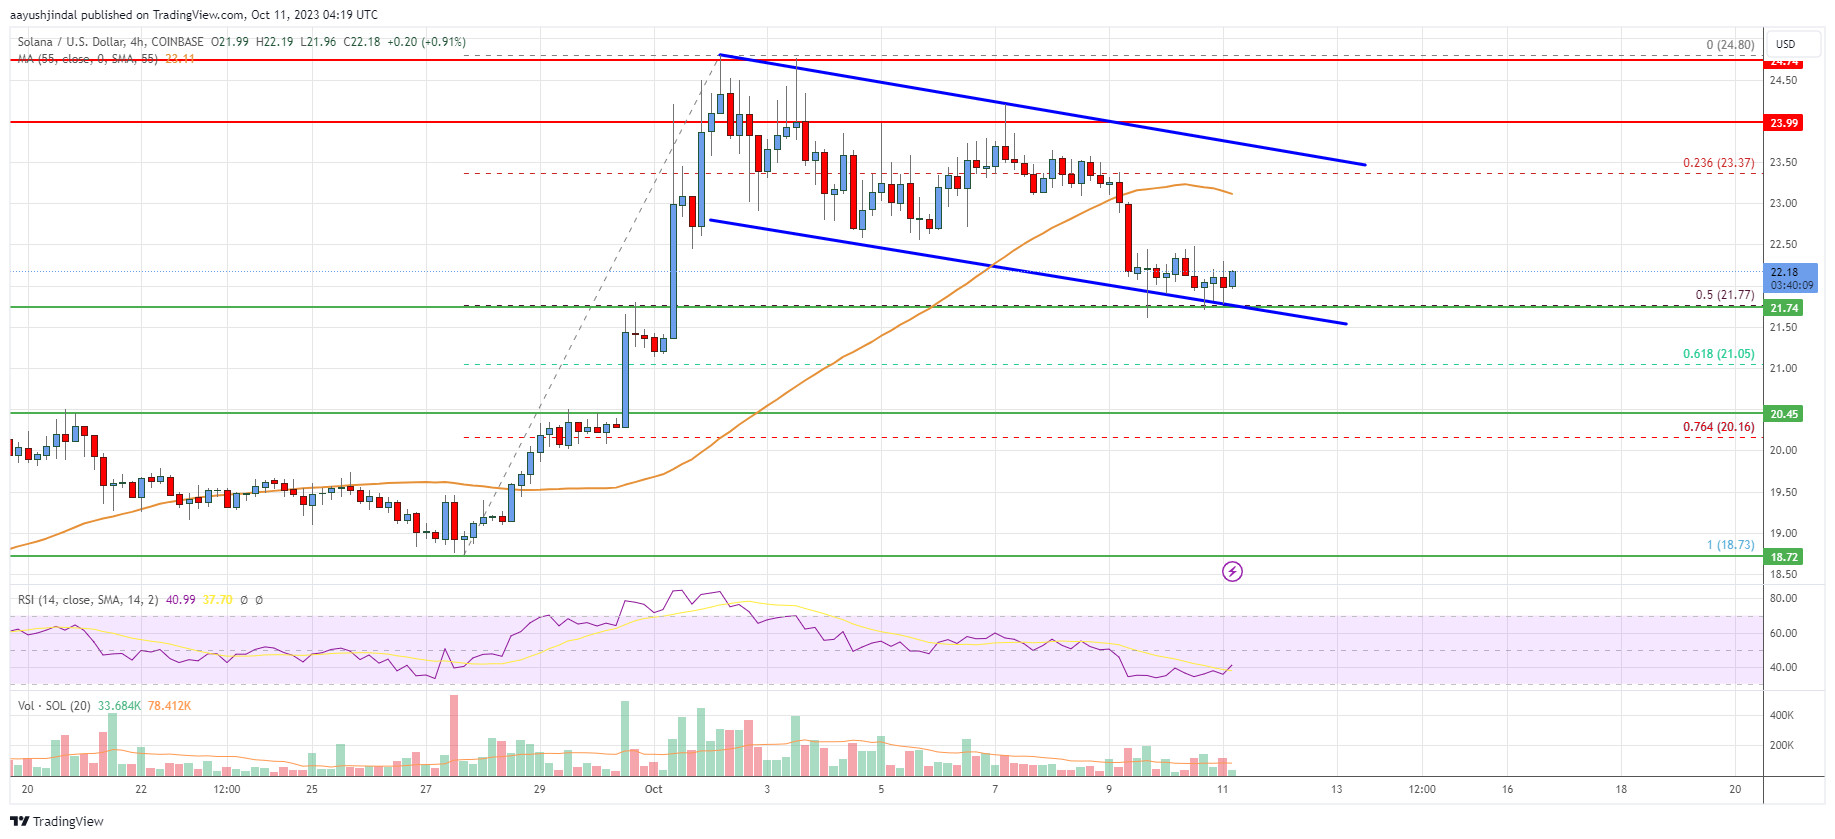 Solana (SOL) Price Analysis: Rally Could Resume From $21.50